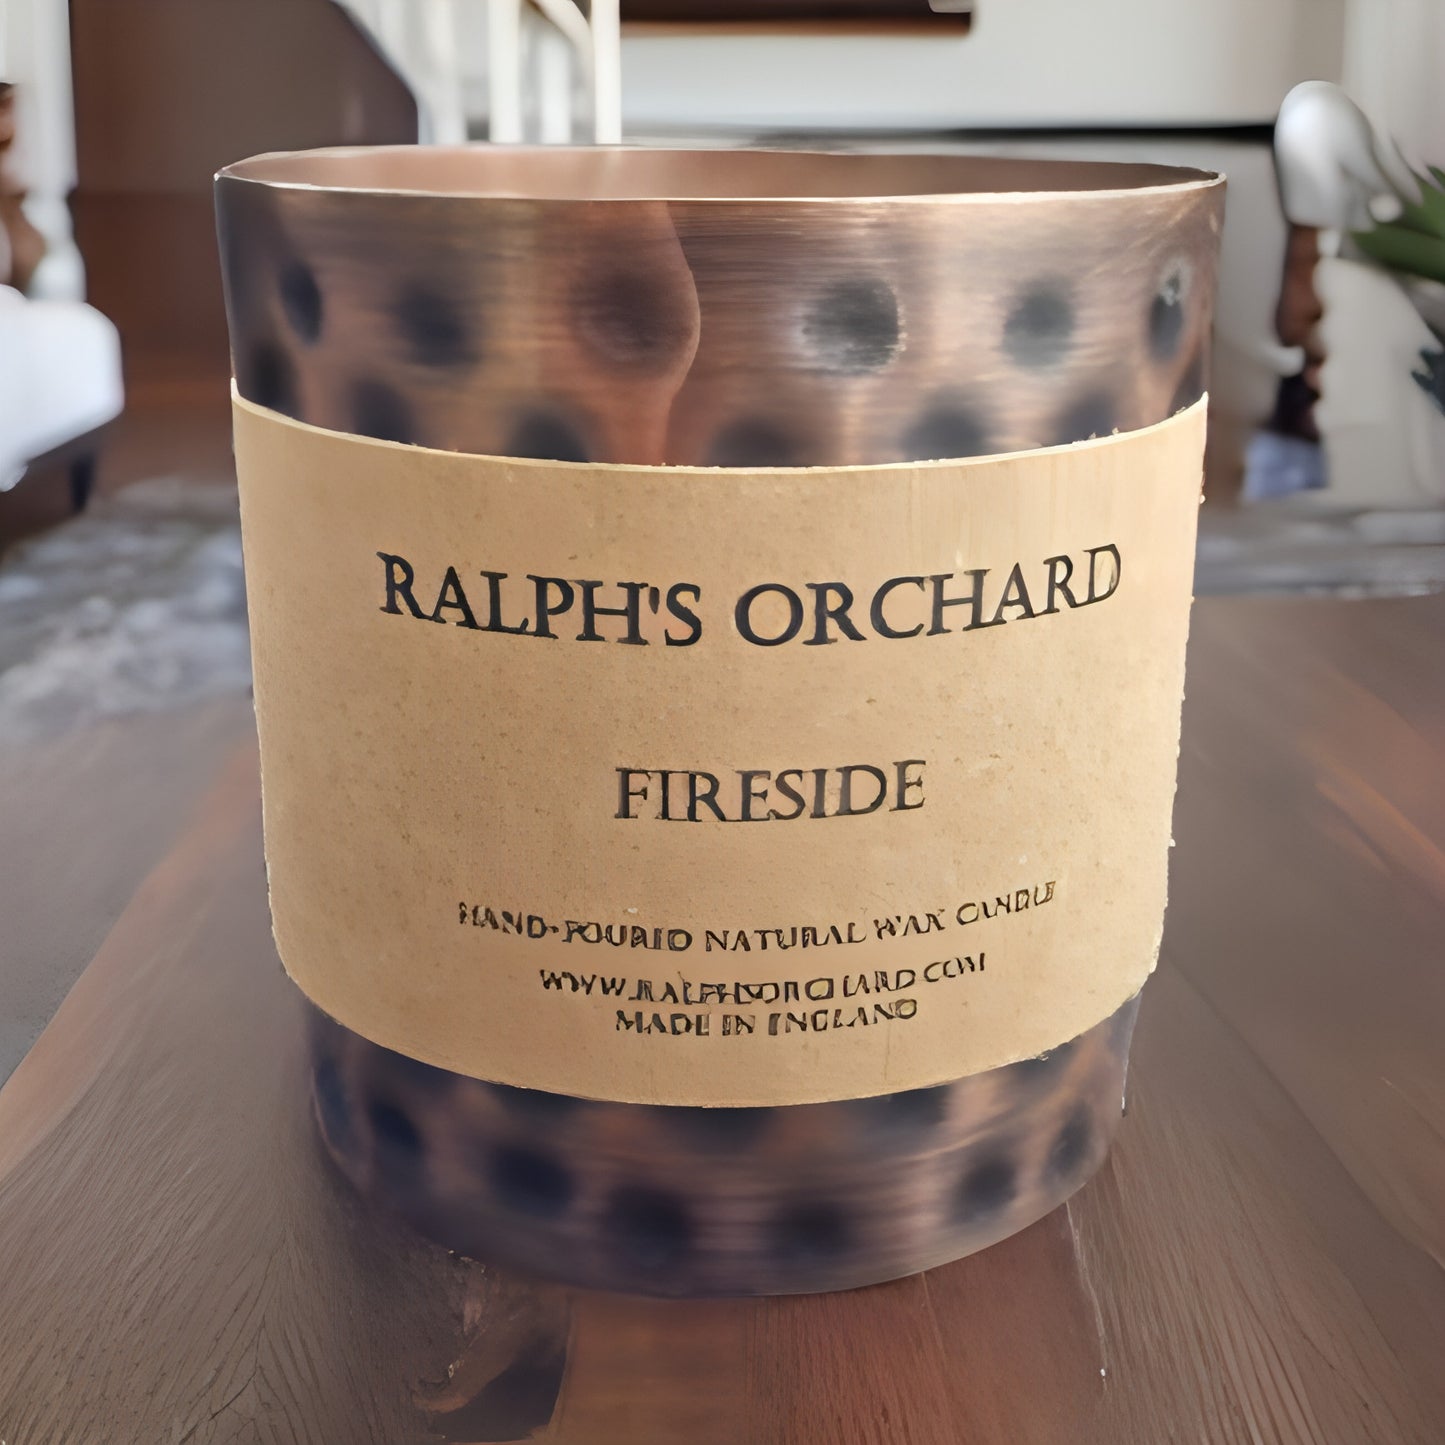 Fireside scented natural candle